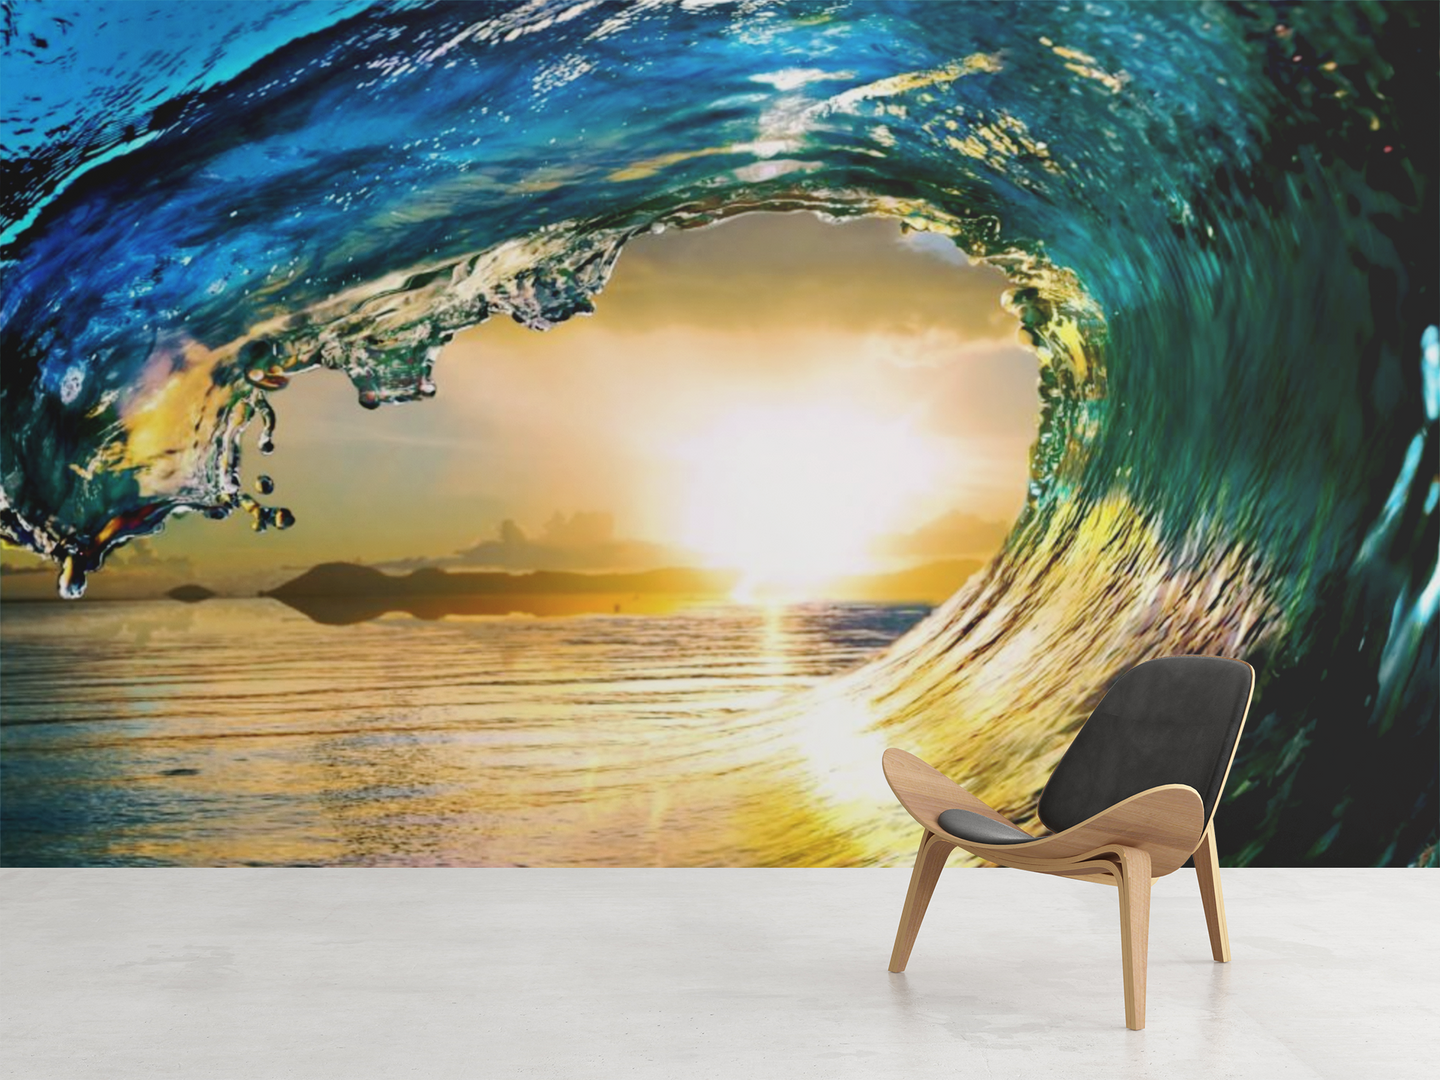 Inside the Wave - 02167 - Wall Murals Printing - wall art